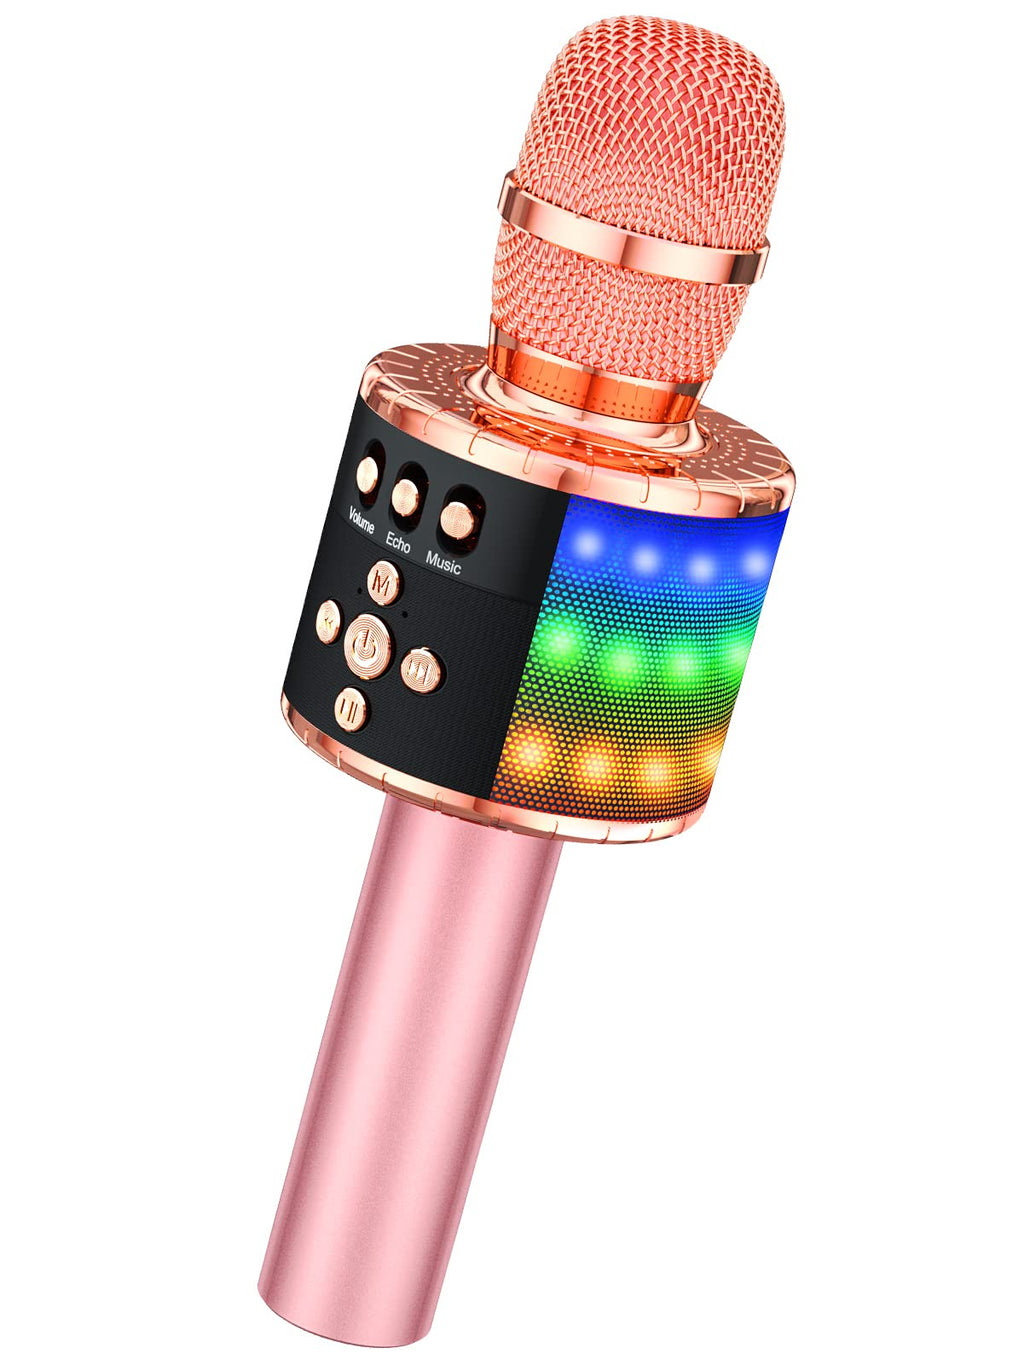 BONAOK Wireless Bluetooth Karaoke Microphone with Controllable LED Lights, 4-in-1 Portable Handheld Mic Speaker for All Smartphones, Birthday for Kids Adults All Age Q78 (Rose Gold) Rose Gold